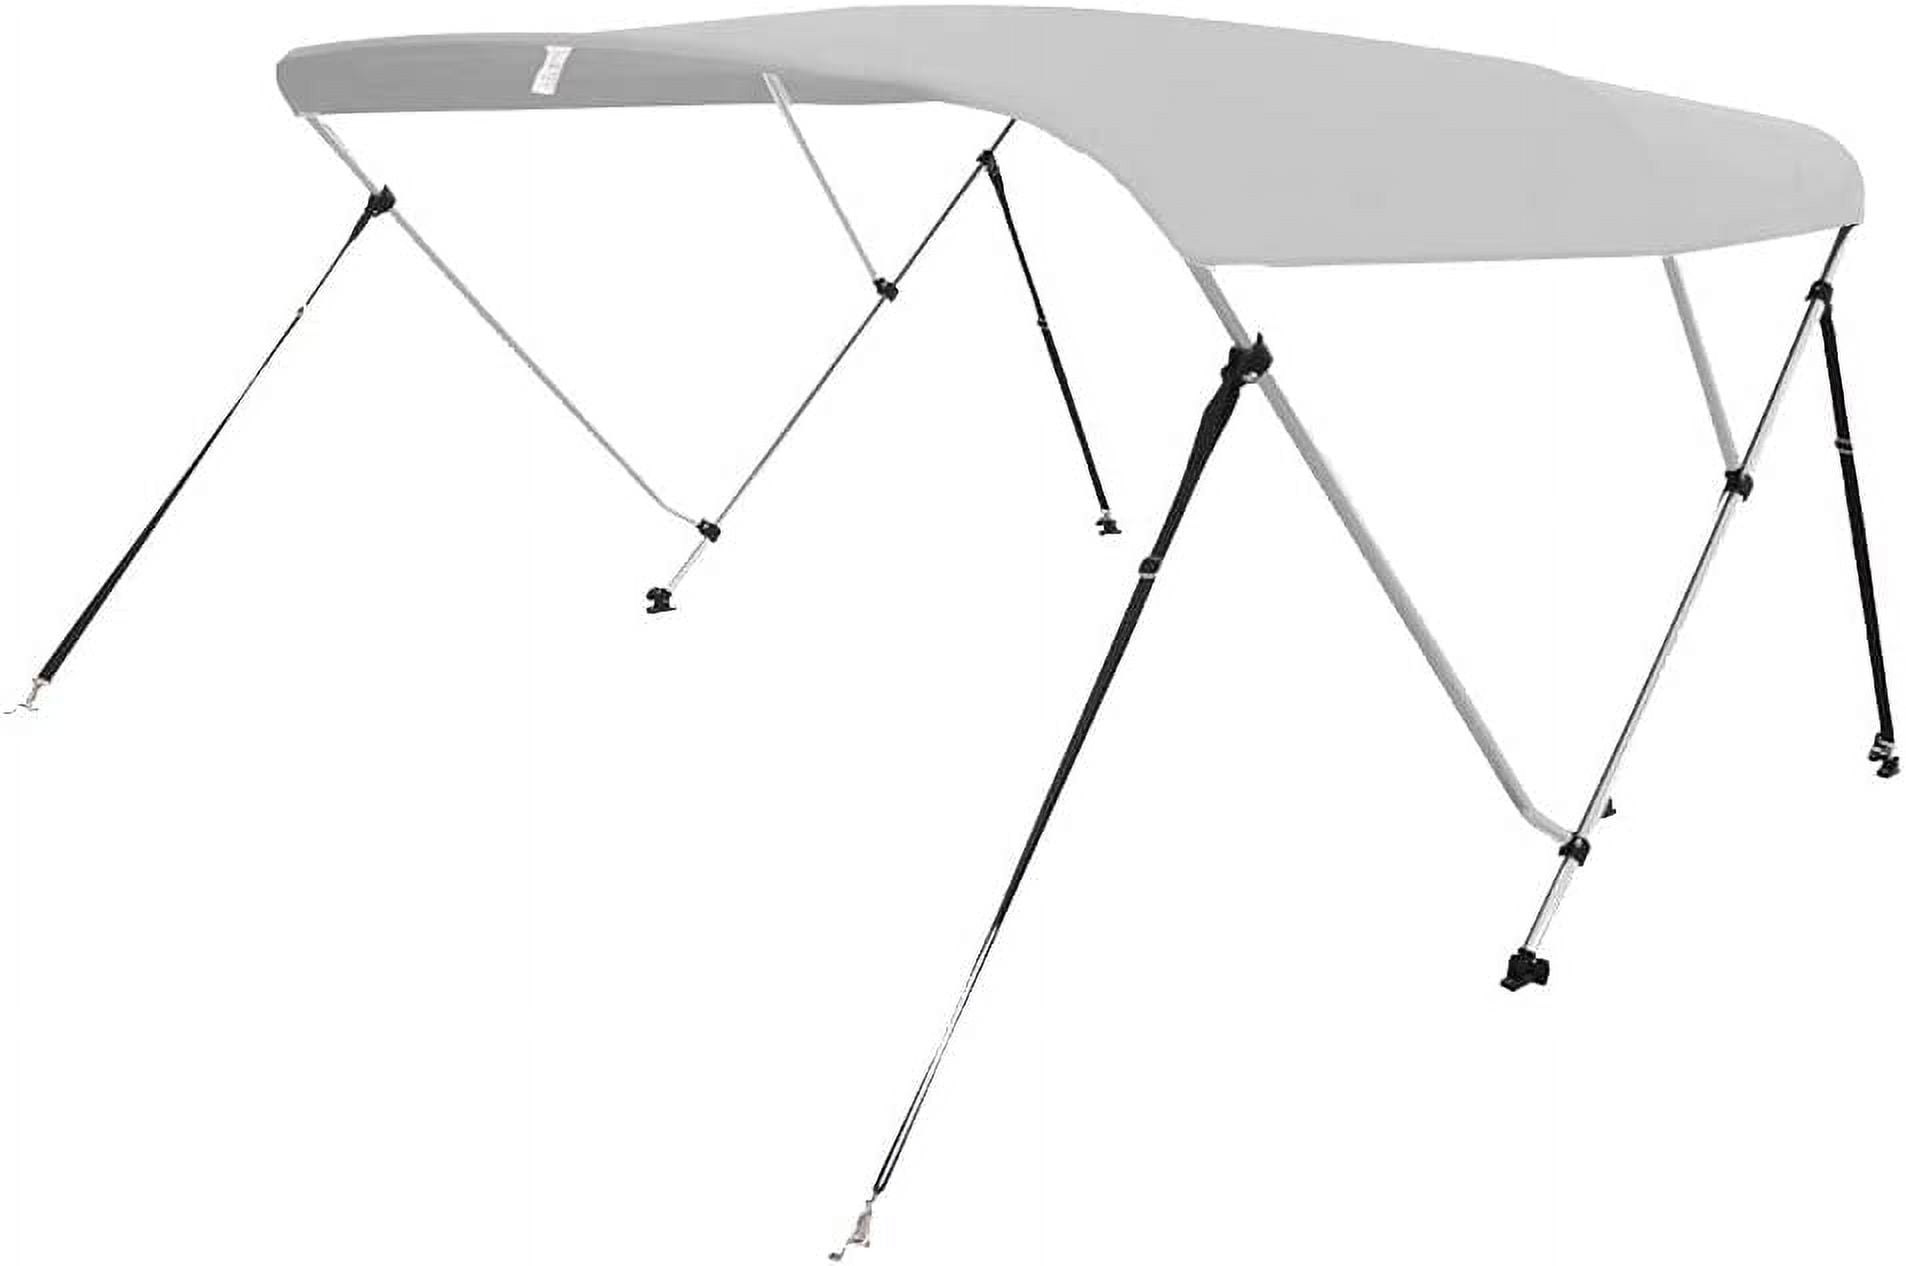 Buy 4 Bow Bimini Top for Boat & Get 20% OFF